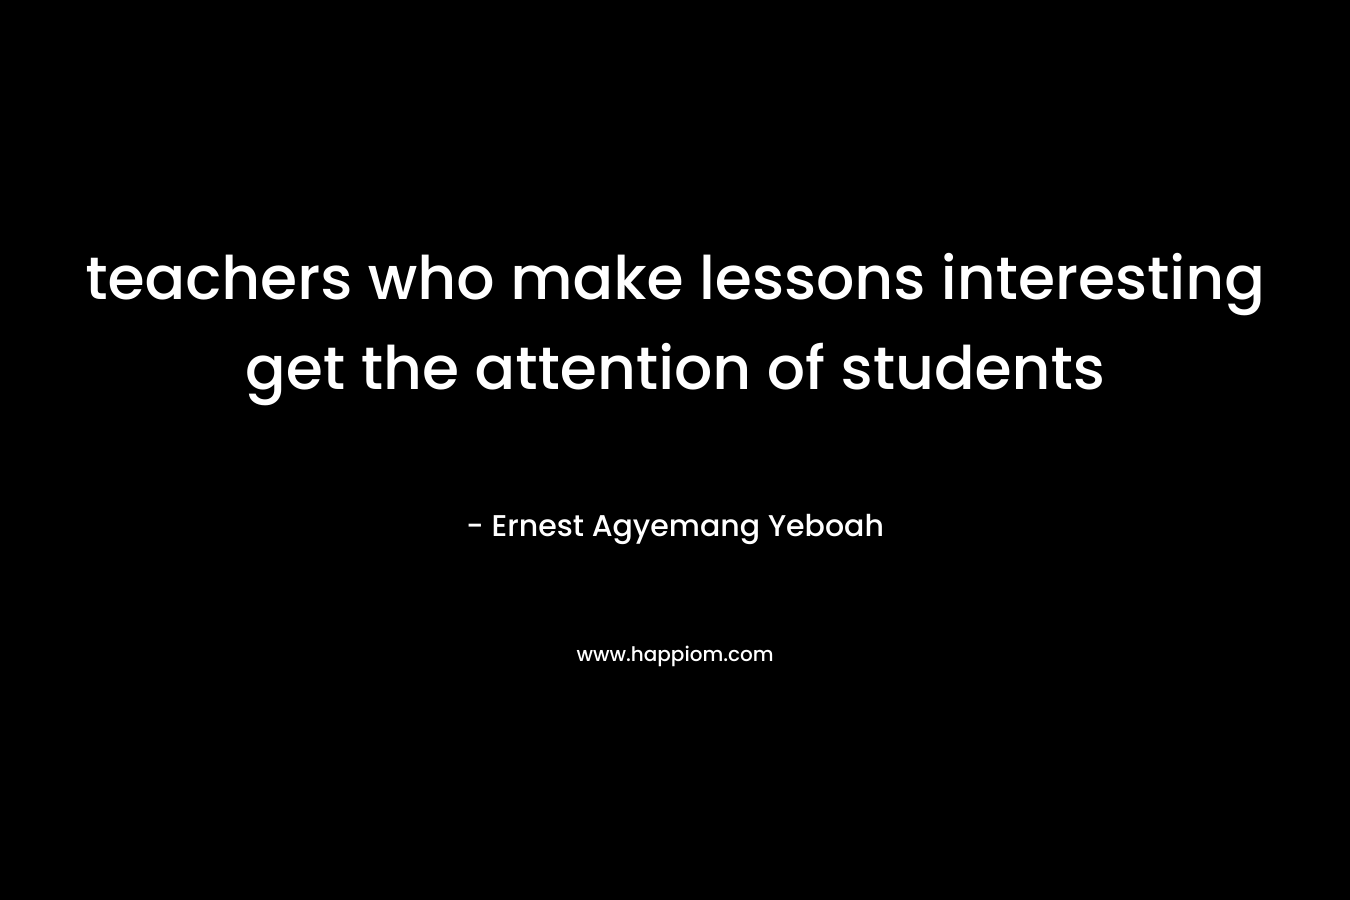 teachers who make lessons interesting get the attention of students